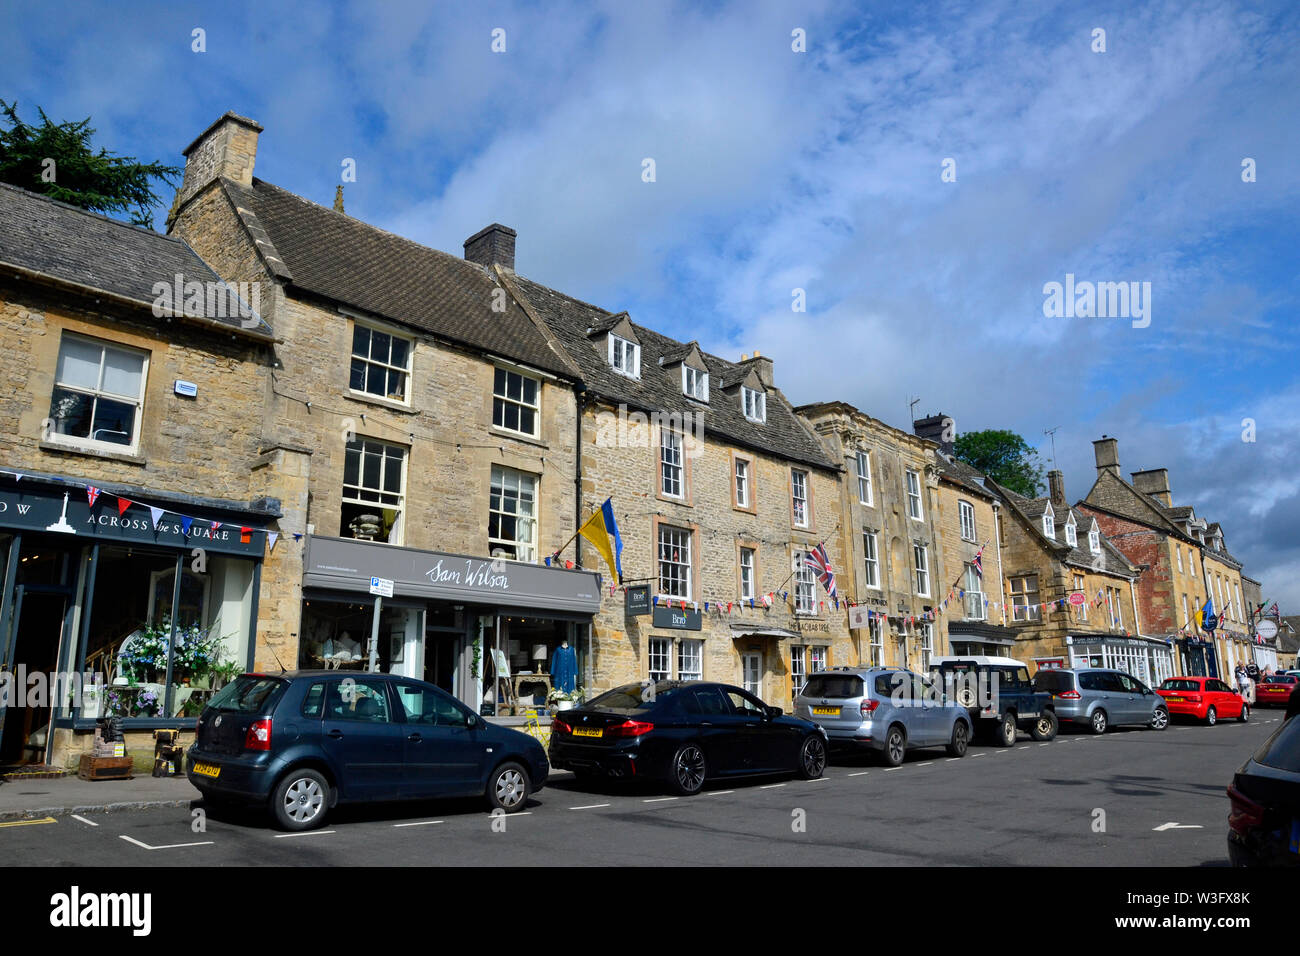 Stow-on-the-Wold, Gloucestershire, England, UK. Ein Dorf in den Cotswolds. Stockfoto